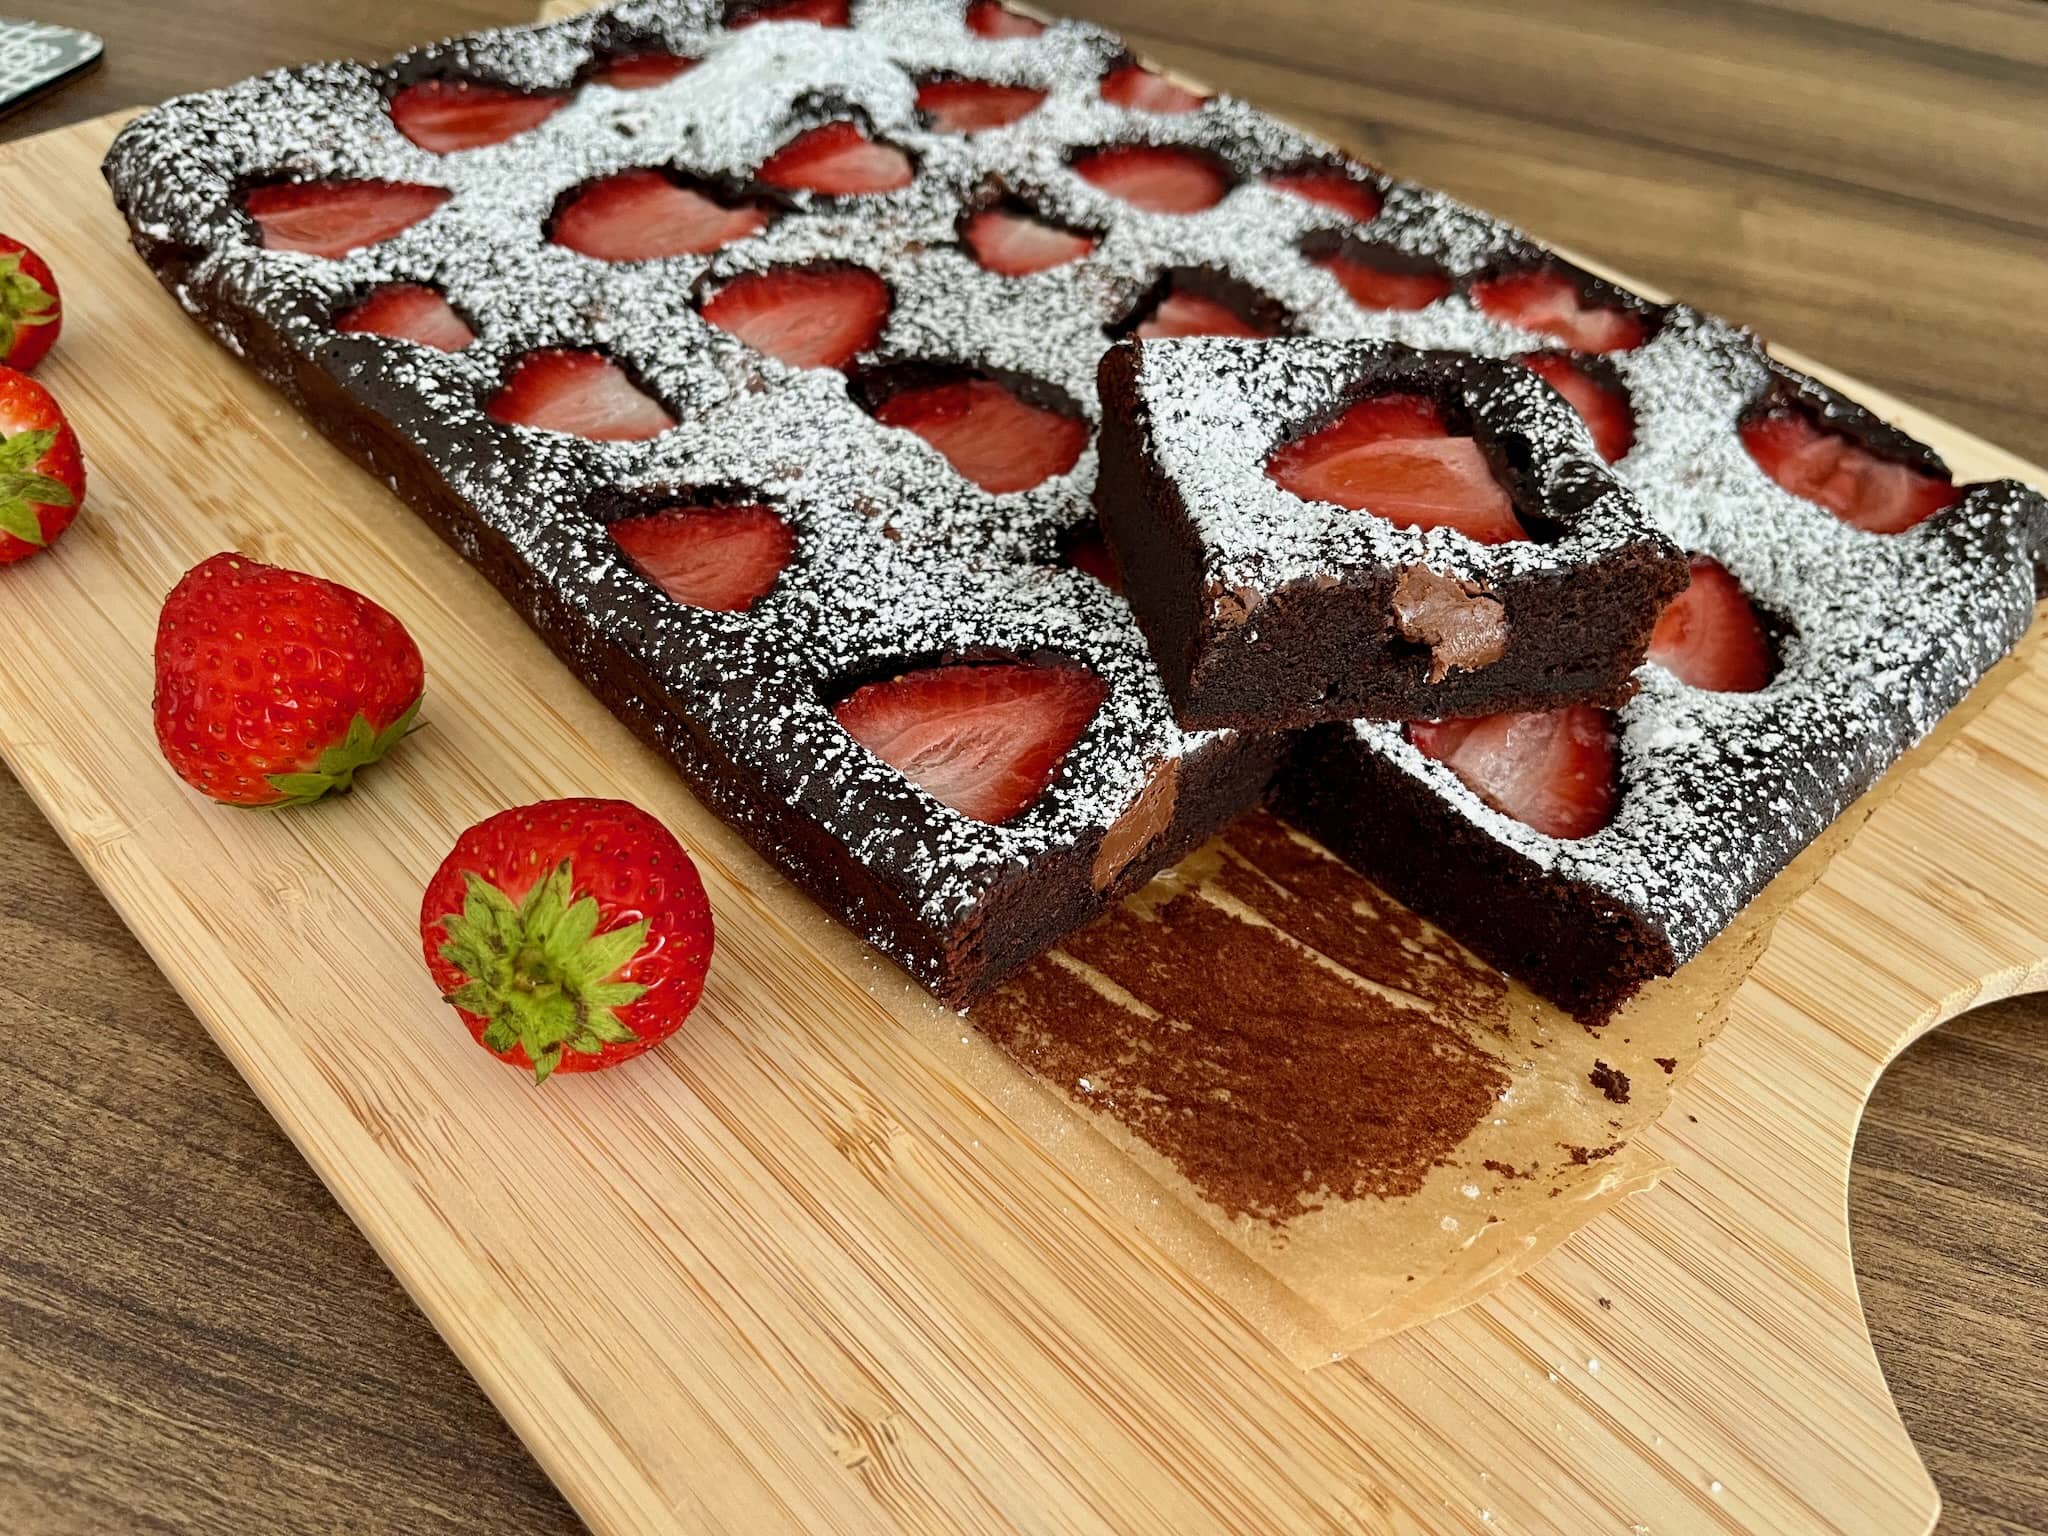 Strawberry Brownie dusted with icing sugar, sliced